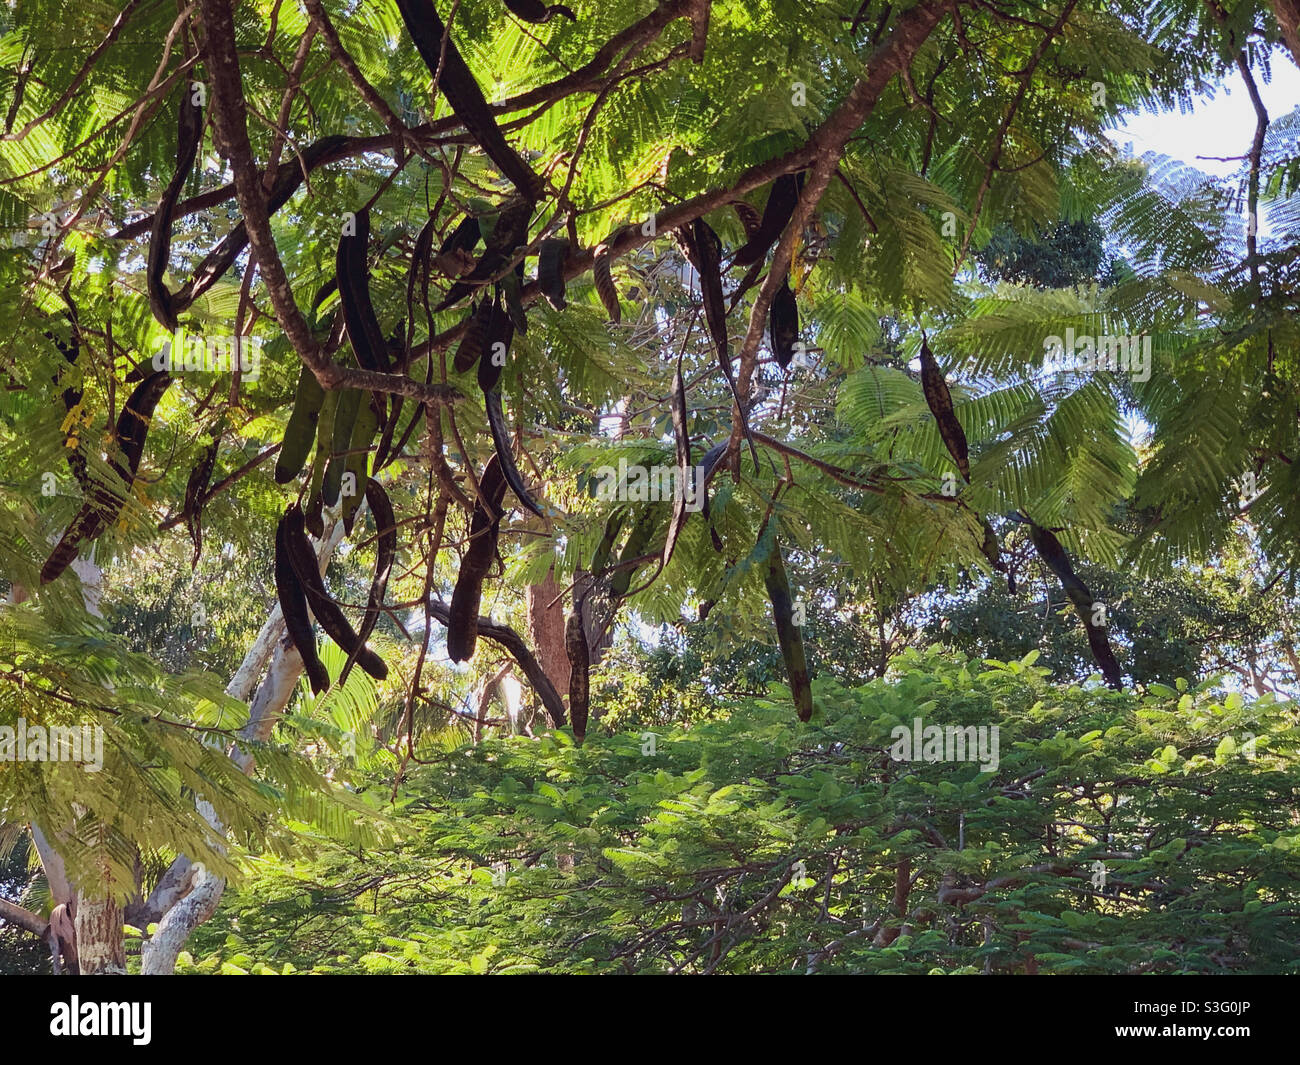 Pretty bright green foliage and large dark brown seed pods on this shady tree Stock Photo